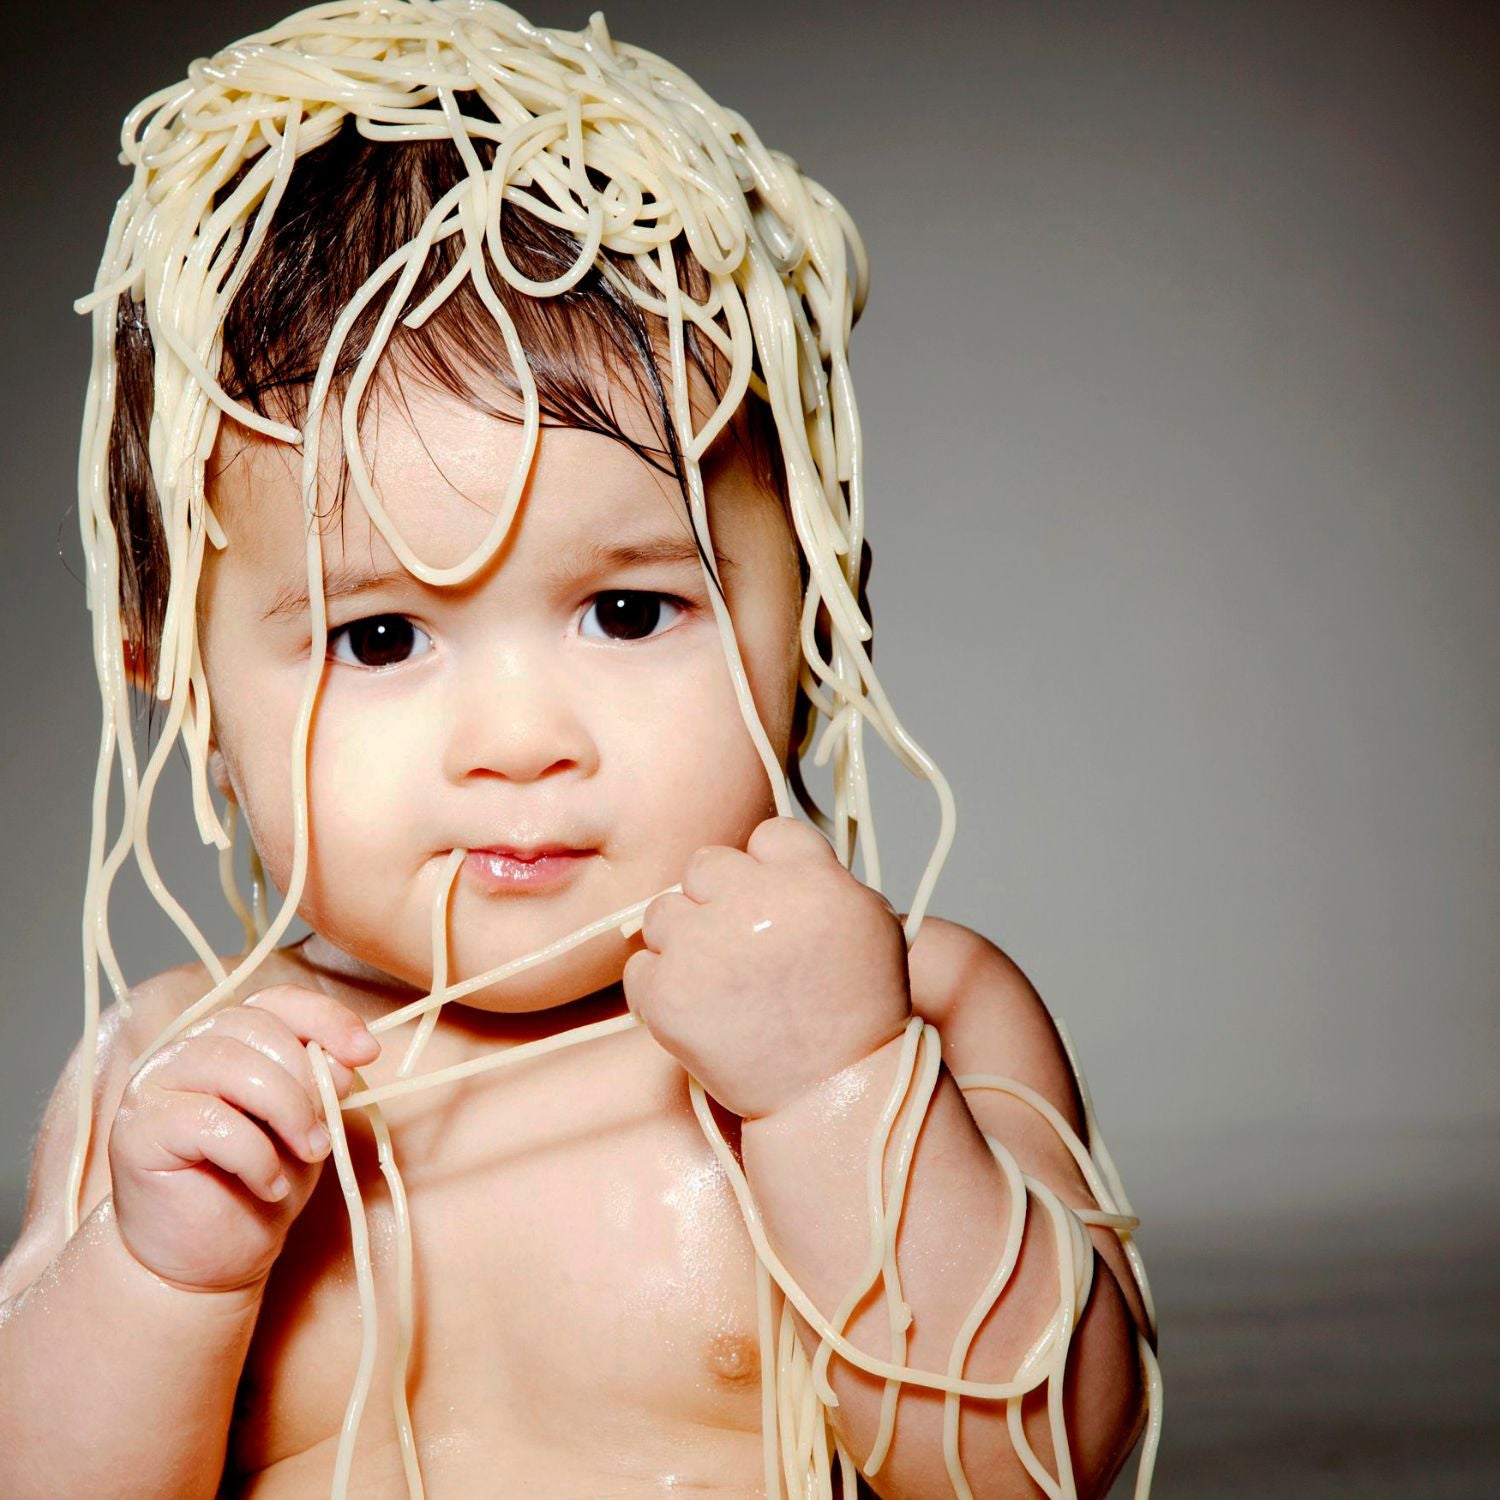 Cute Baby Wants To Eat Noodles Art Prints By Sina Irani Buy